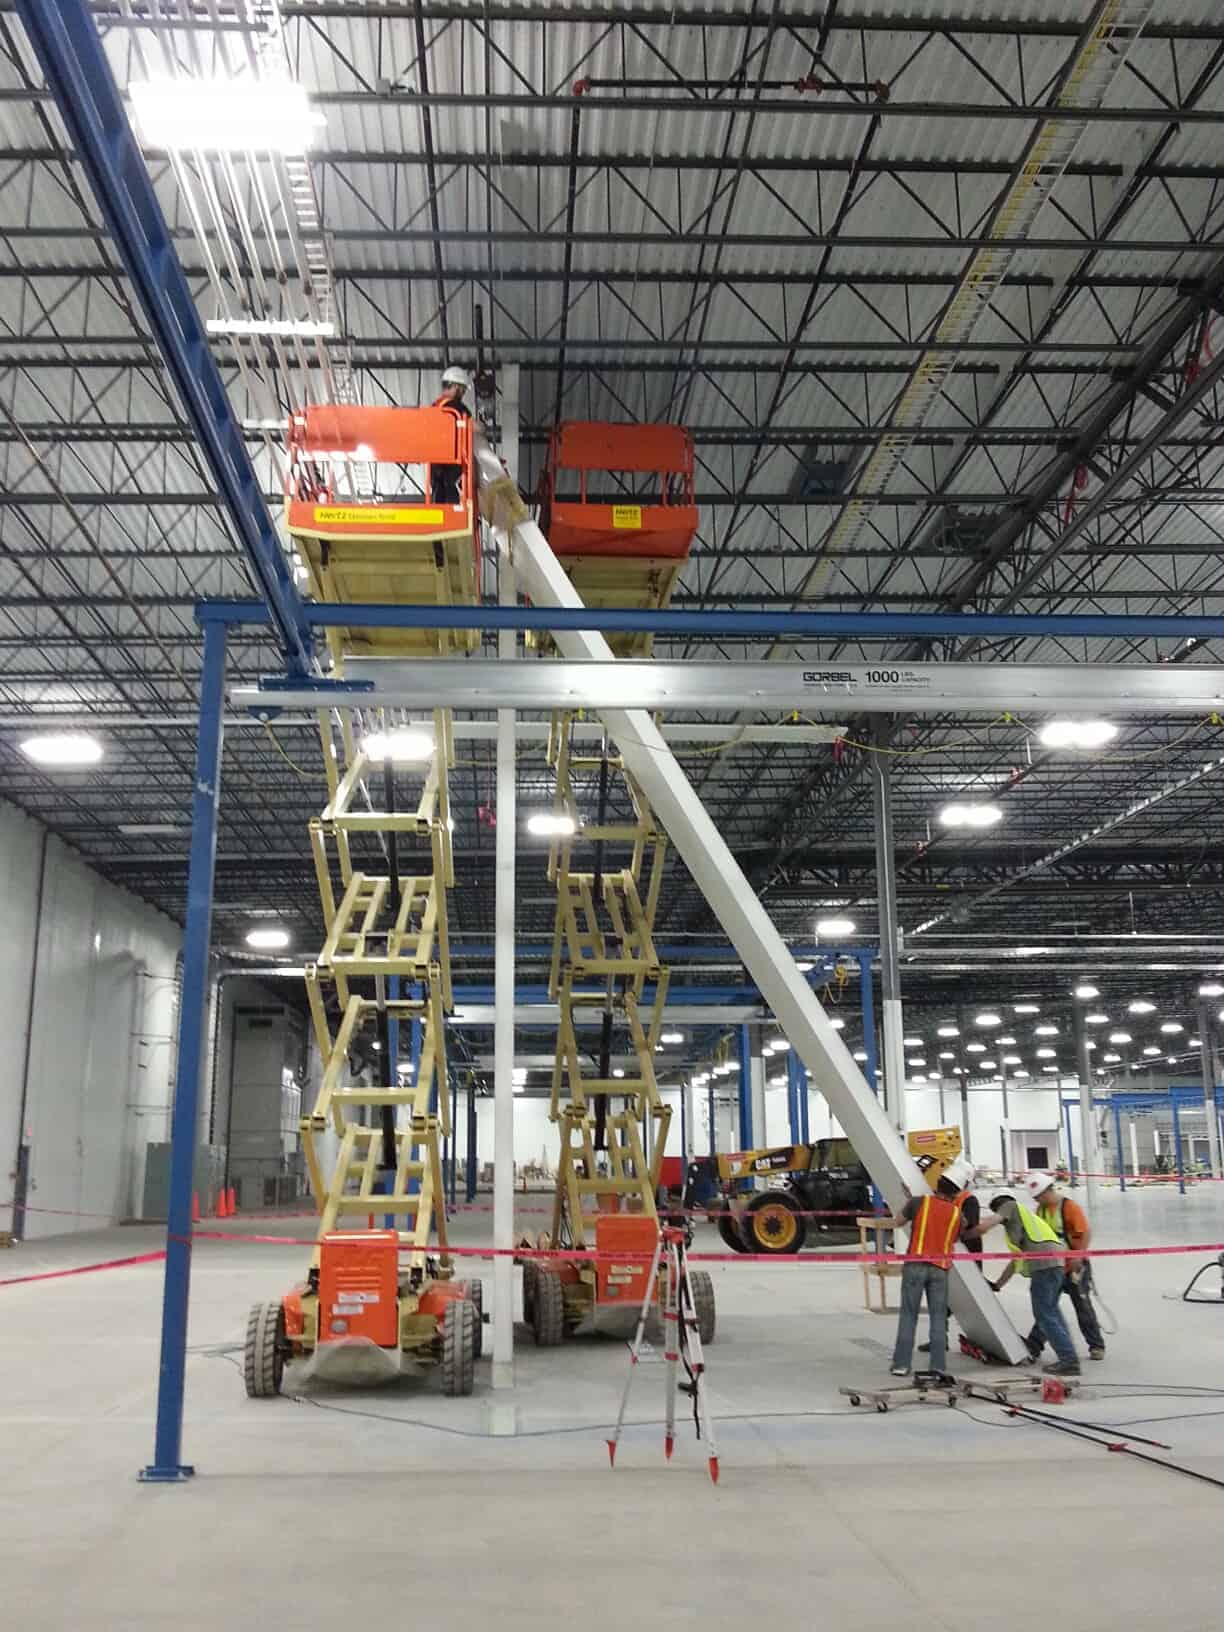 Two workers in a warehouse using scissor lifts to access high areas. One lift is extended towards the ceiling. They wear safety gear, and another group discusses plans below near modular partition walls.